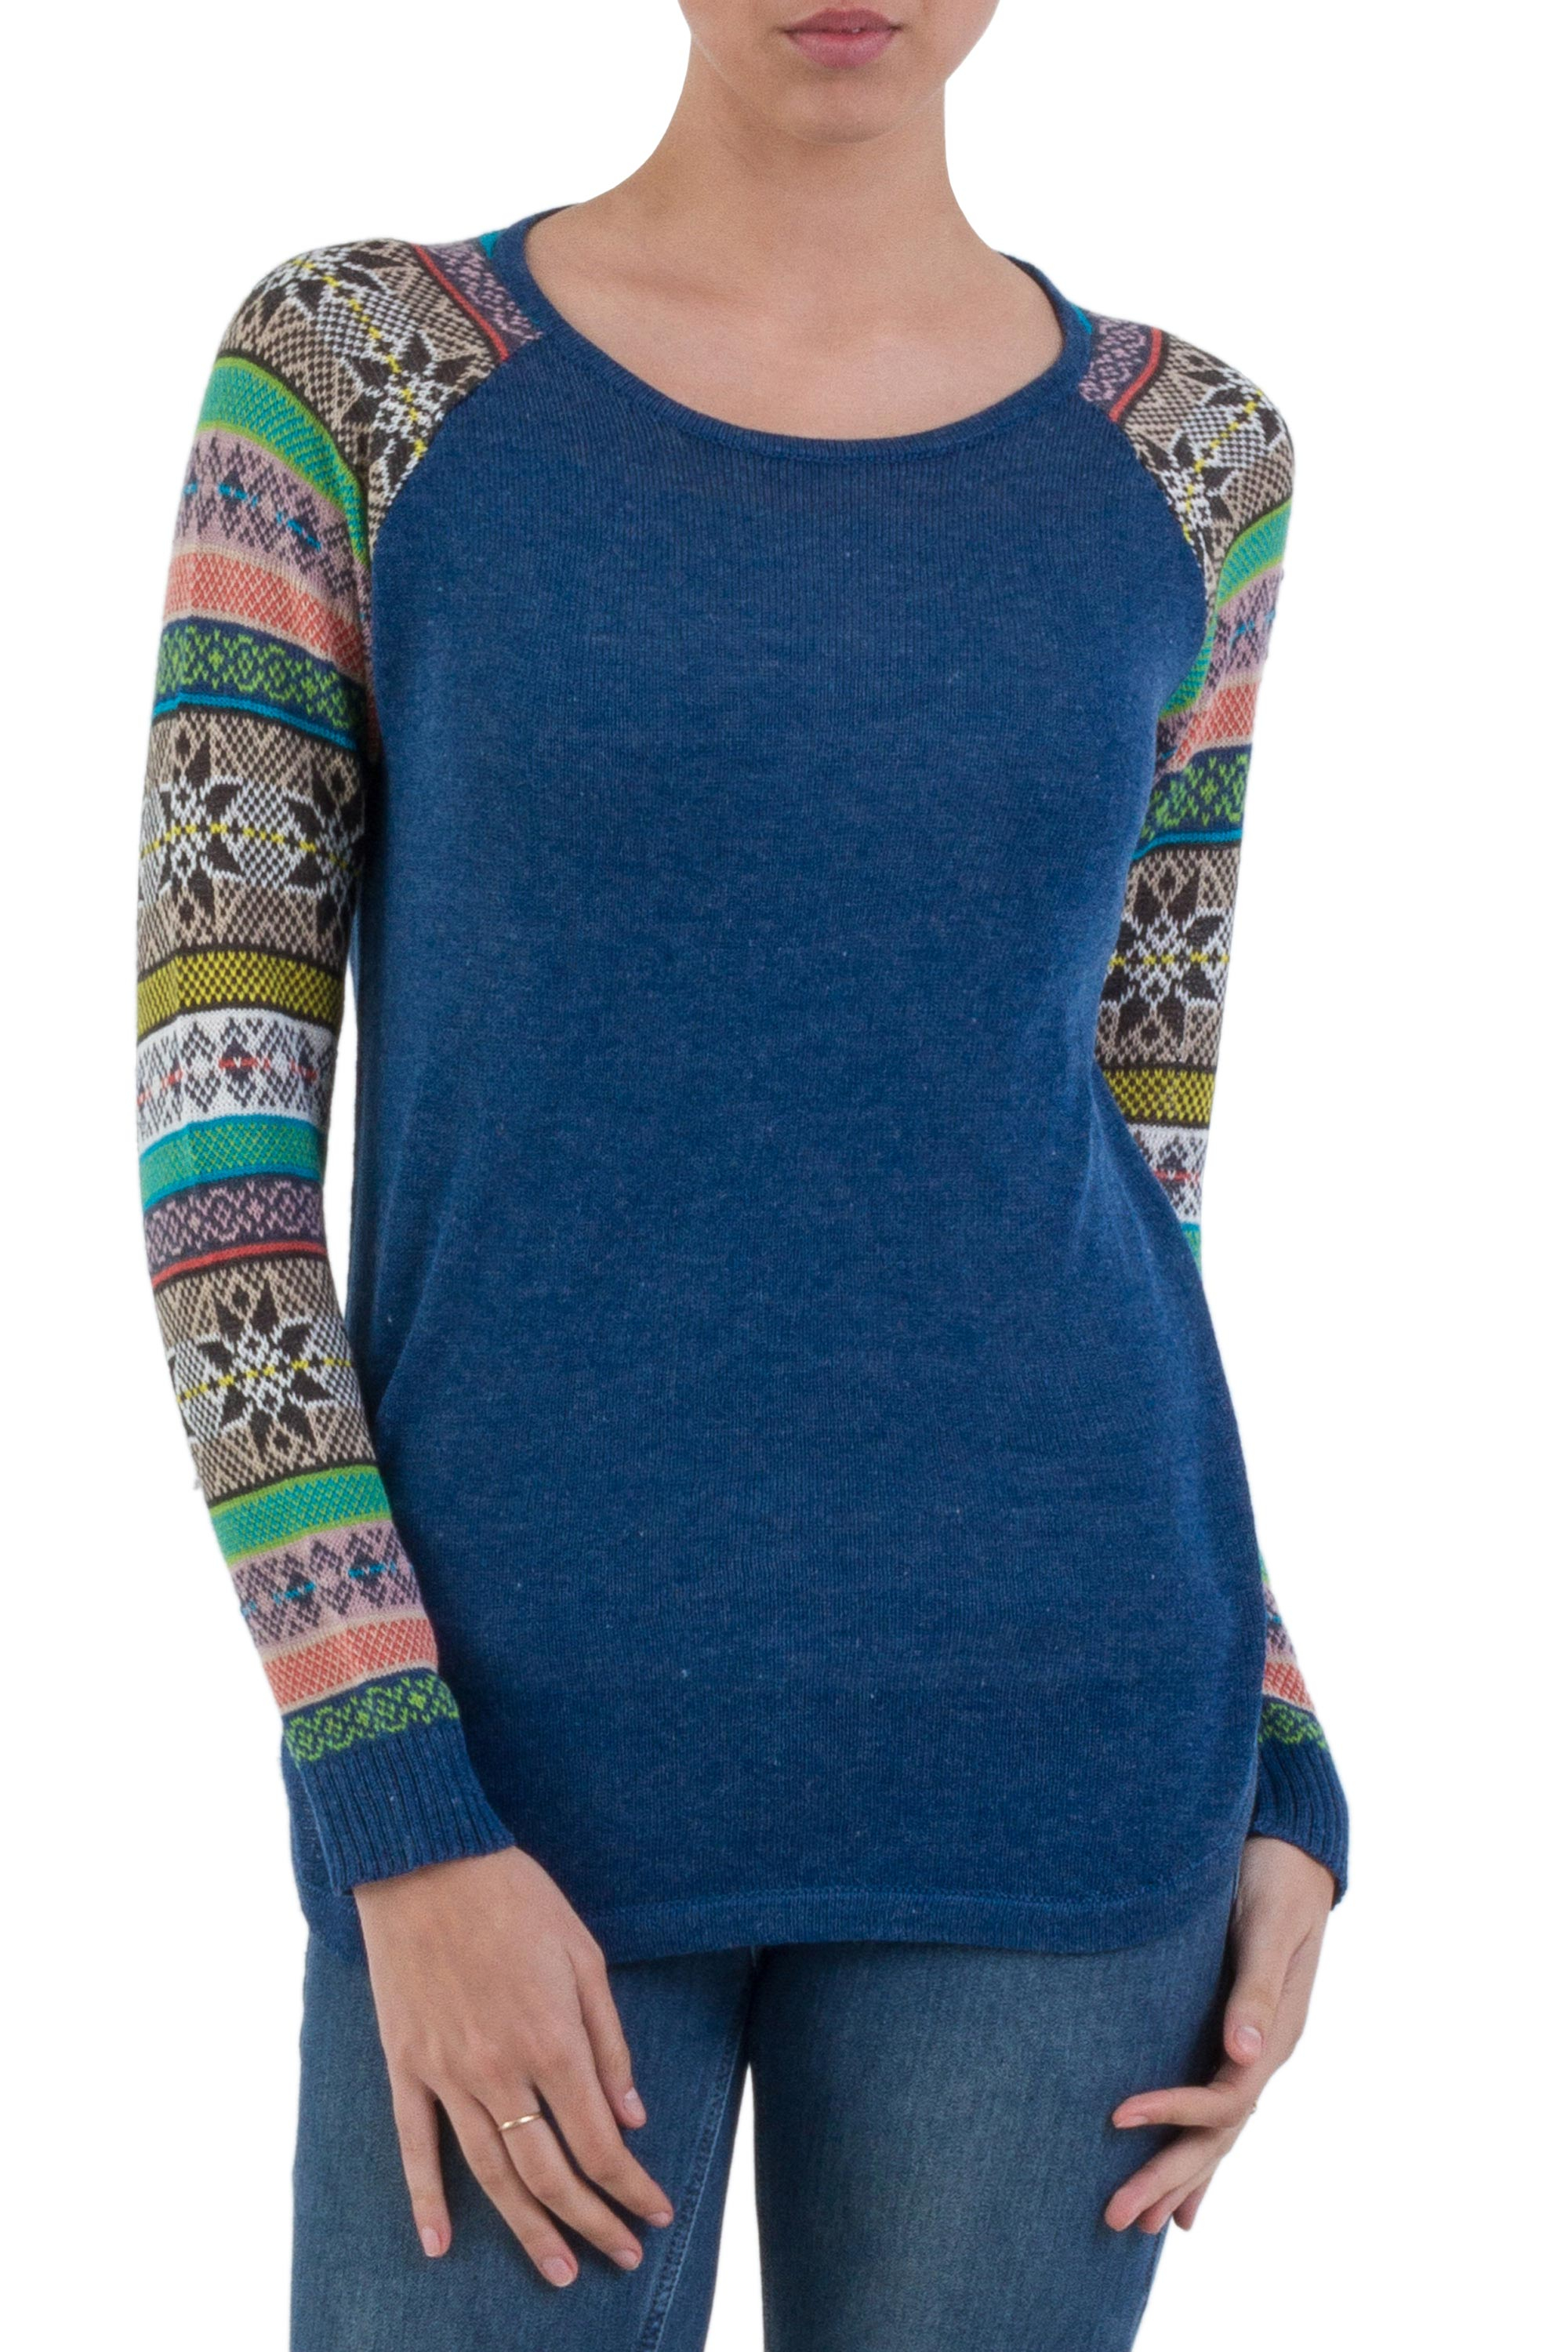 Indigo Blue Sweater with Star Pattern Multicolor Sleeves - Andean Star ...